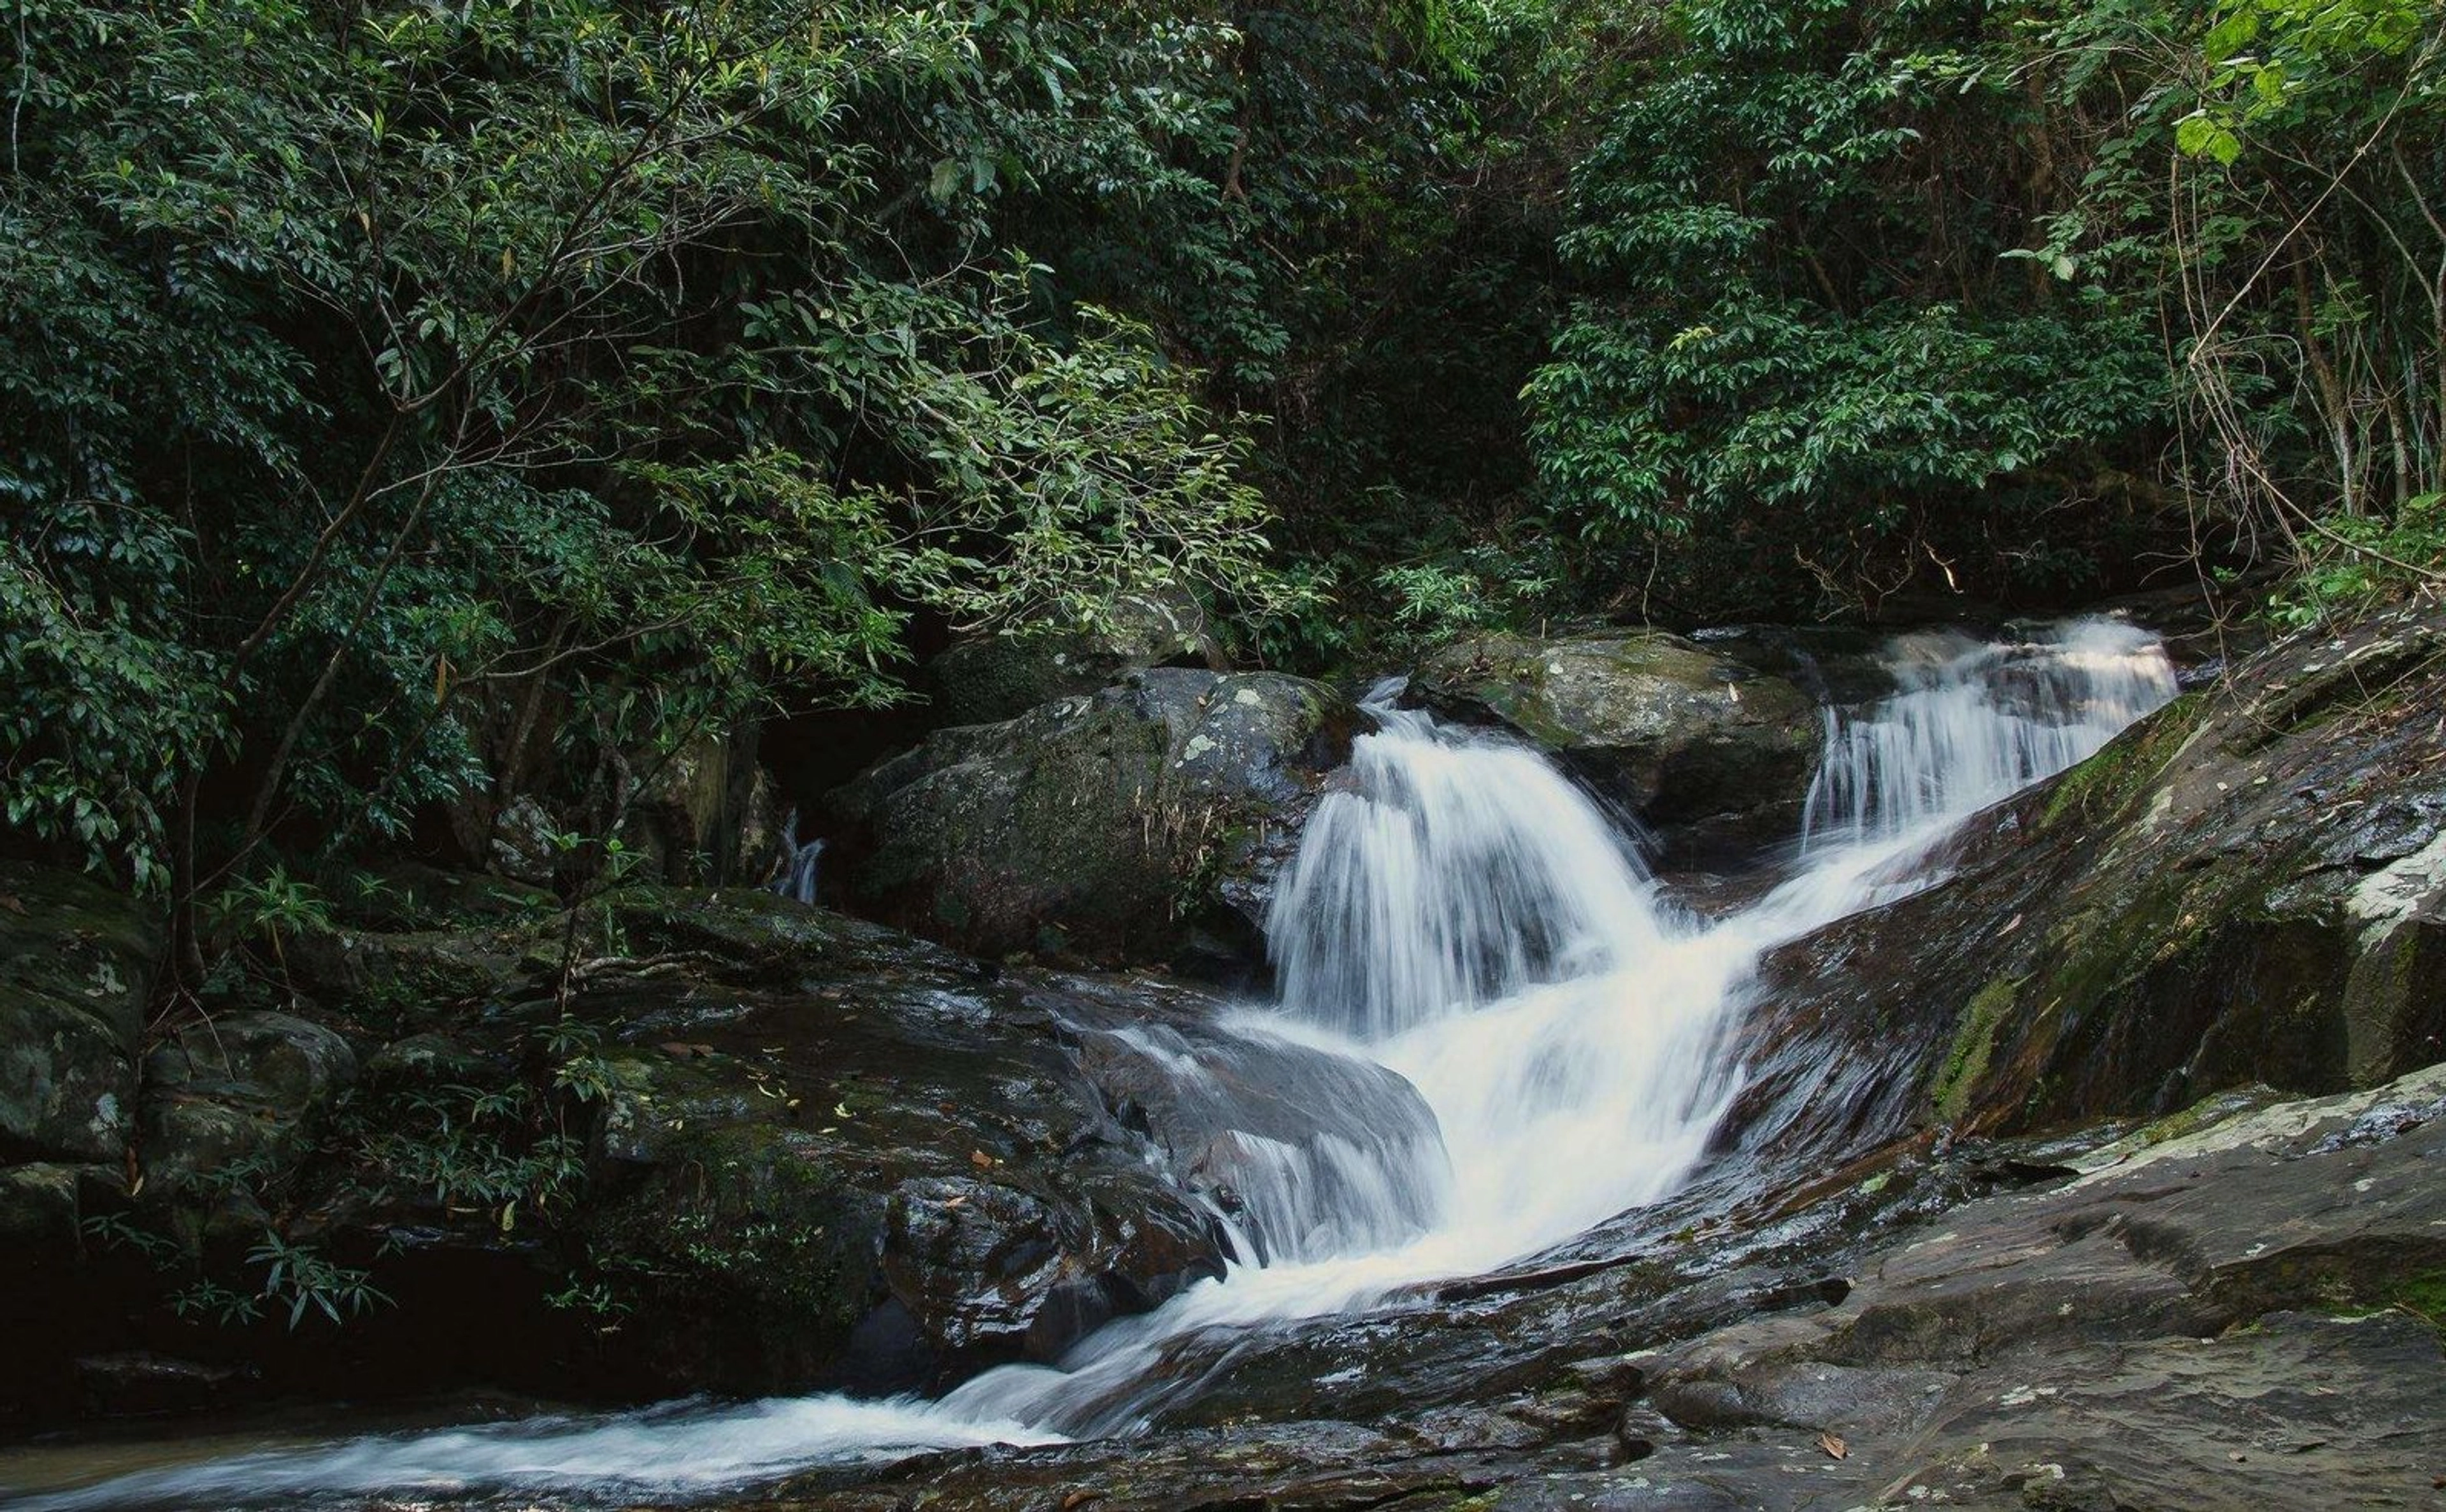 Explore Ba Do Phot waterfall - A trekking destination not to be missed